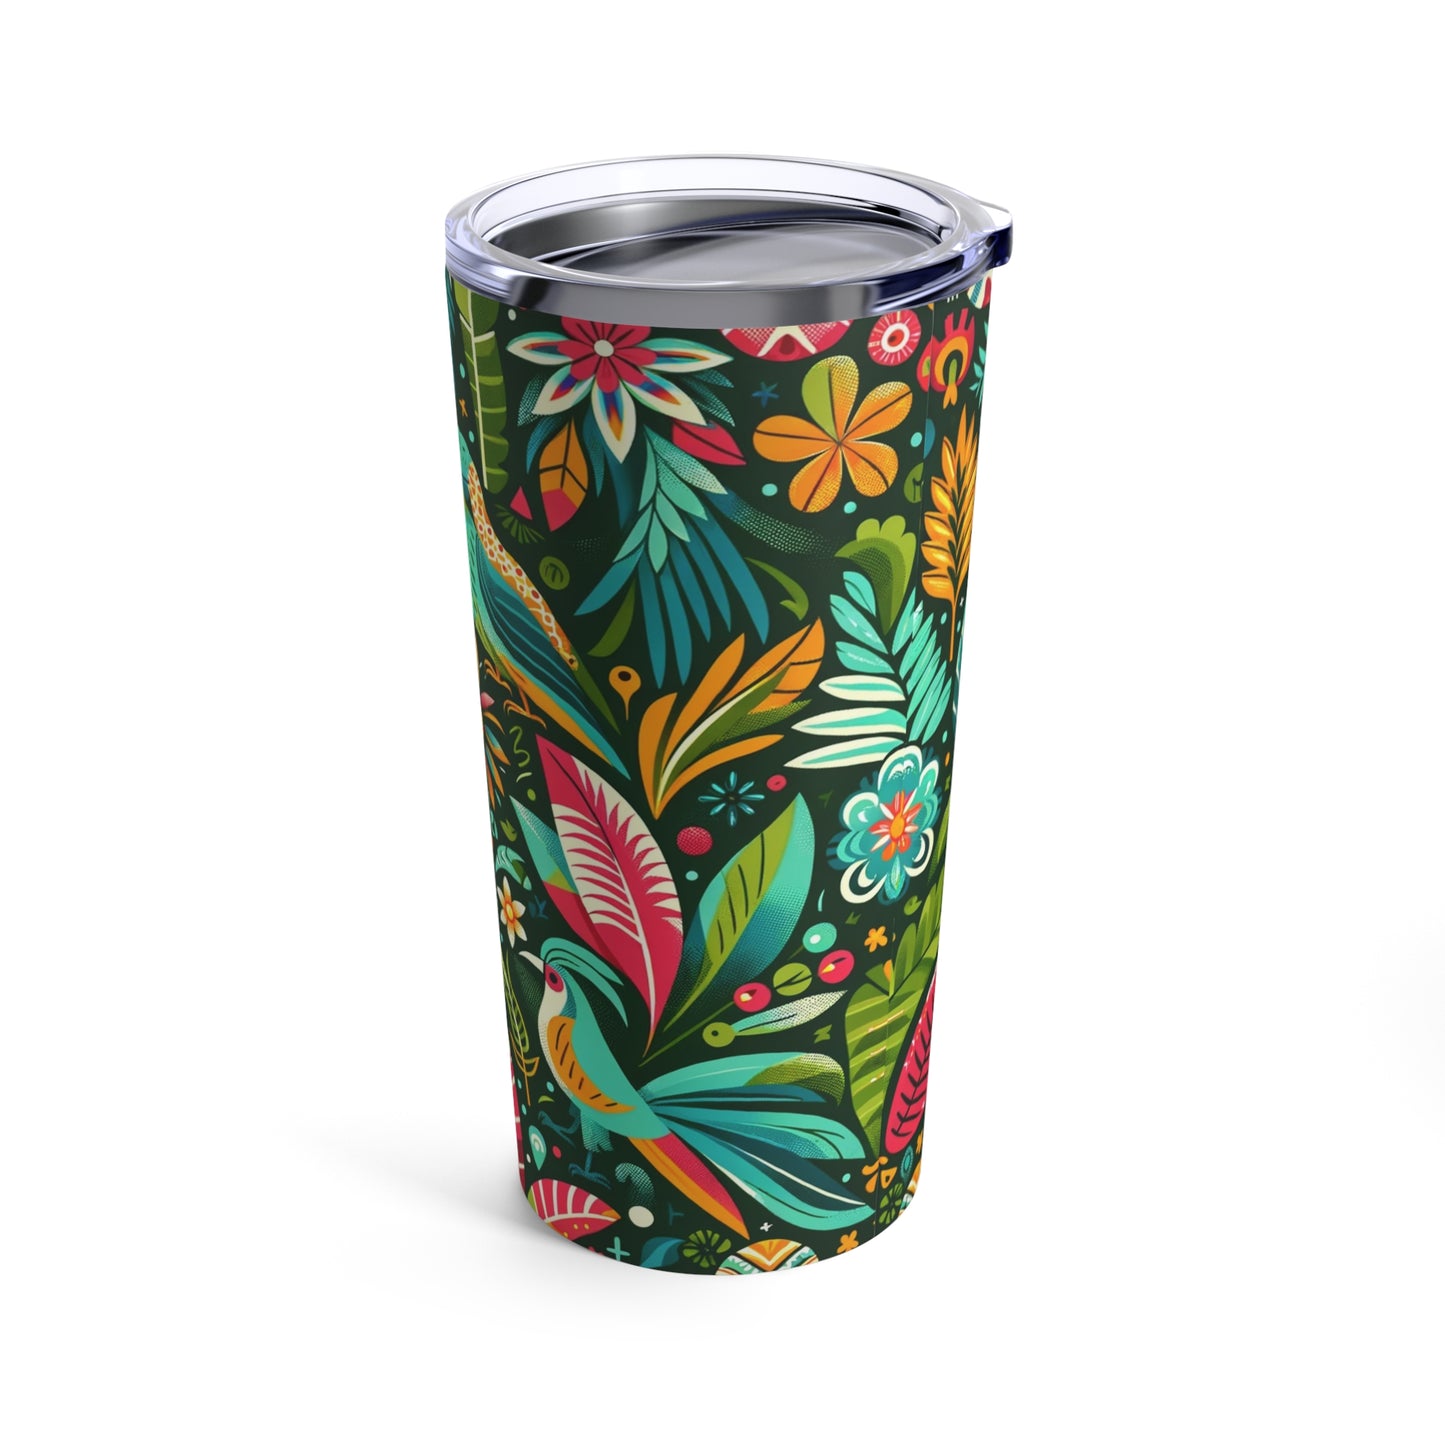 Jungle Adventure 20oz Tumbler - Vibrant Tropical Theme with Exotic Birds and Flowers